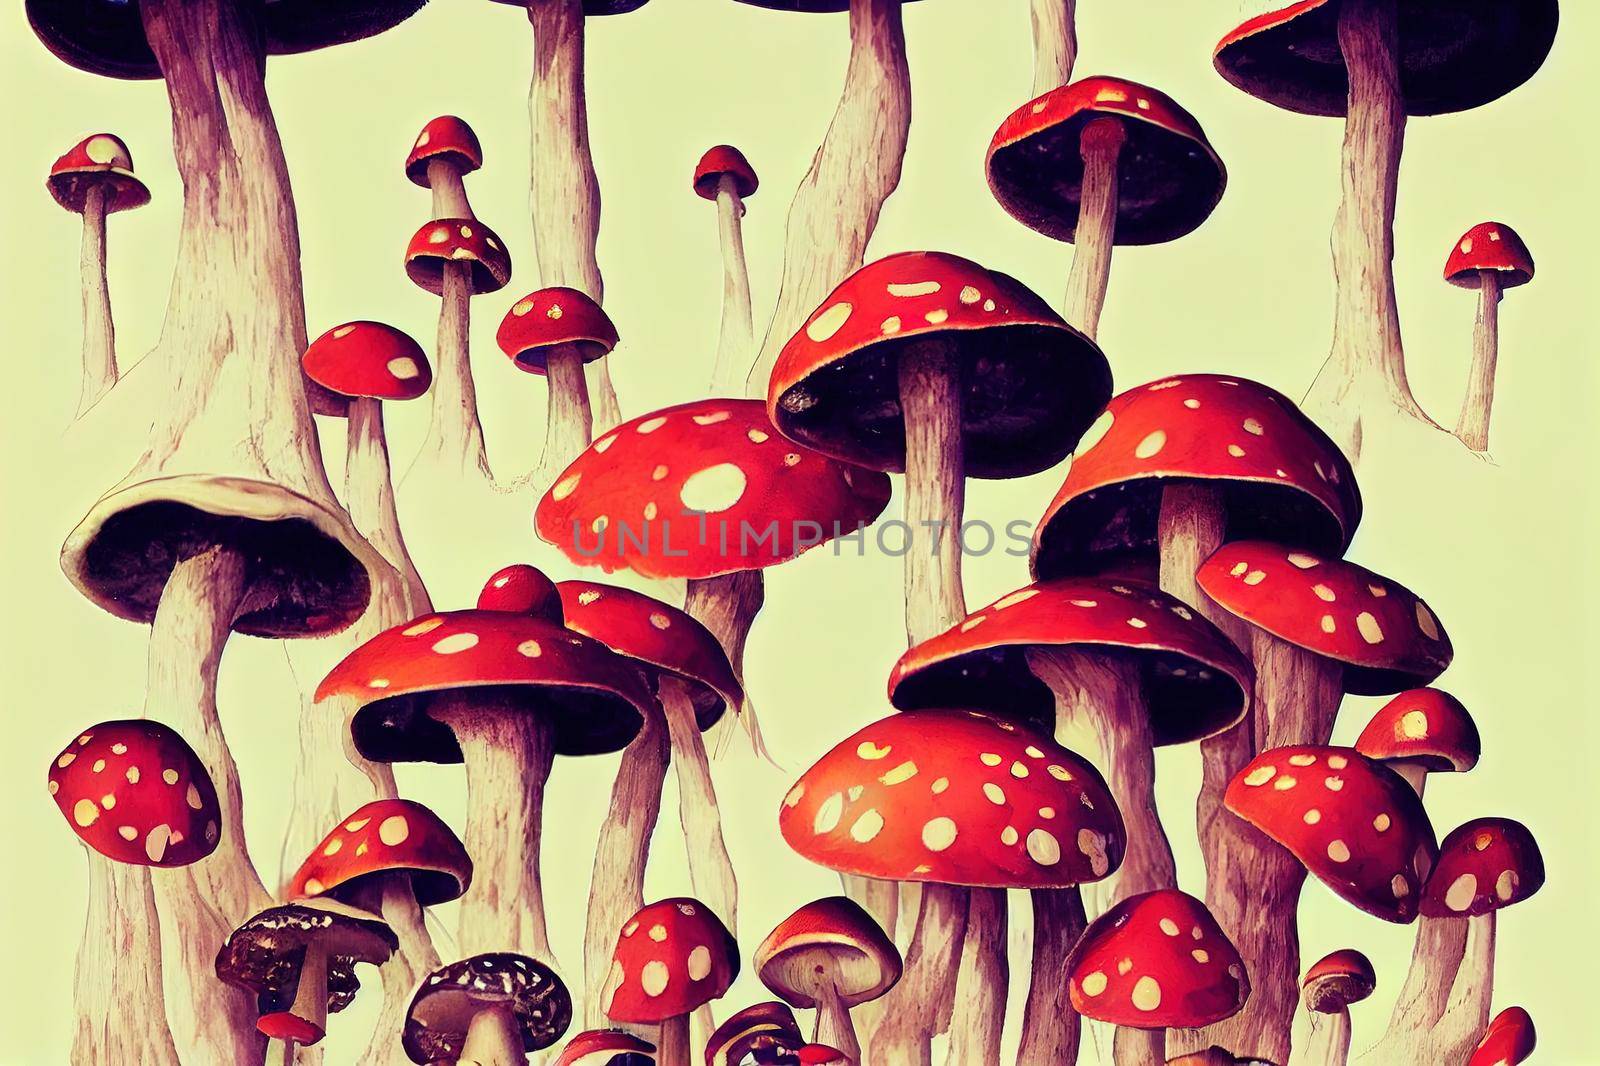 Most beautiful mushroom collage. All photos are individually photographed by 2ragon